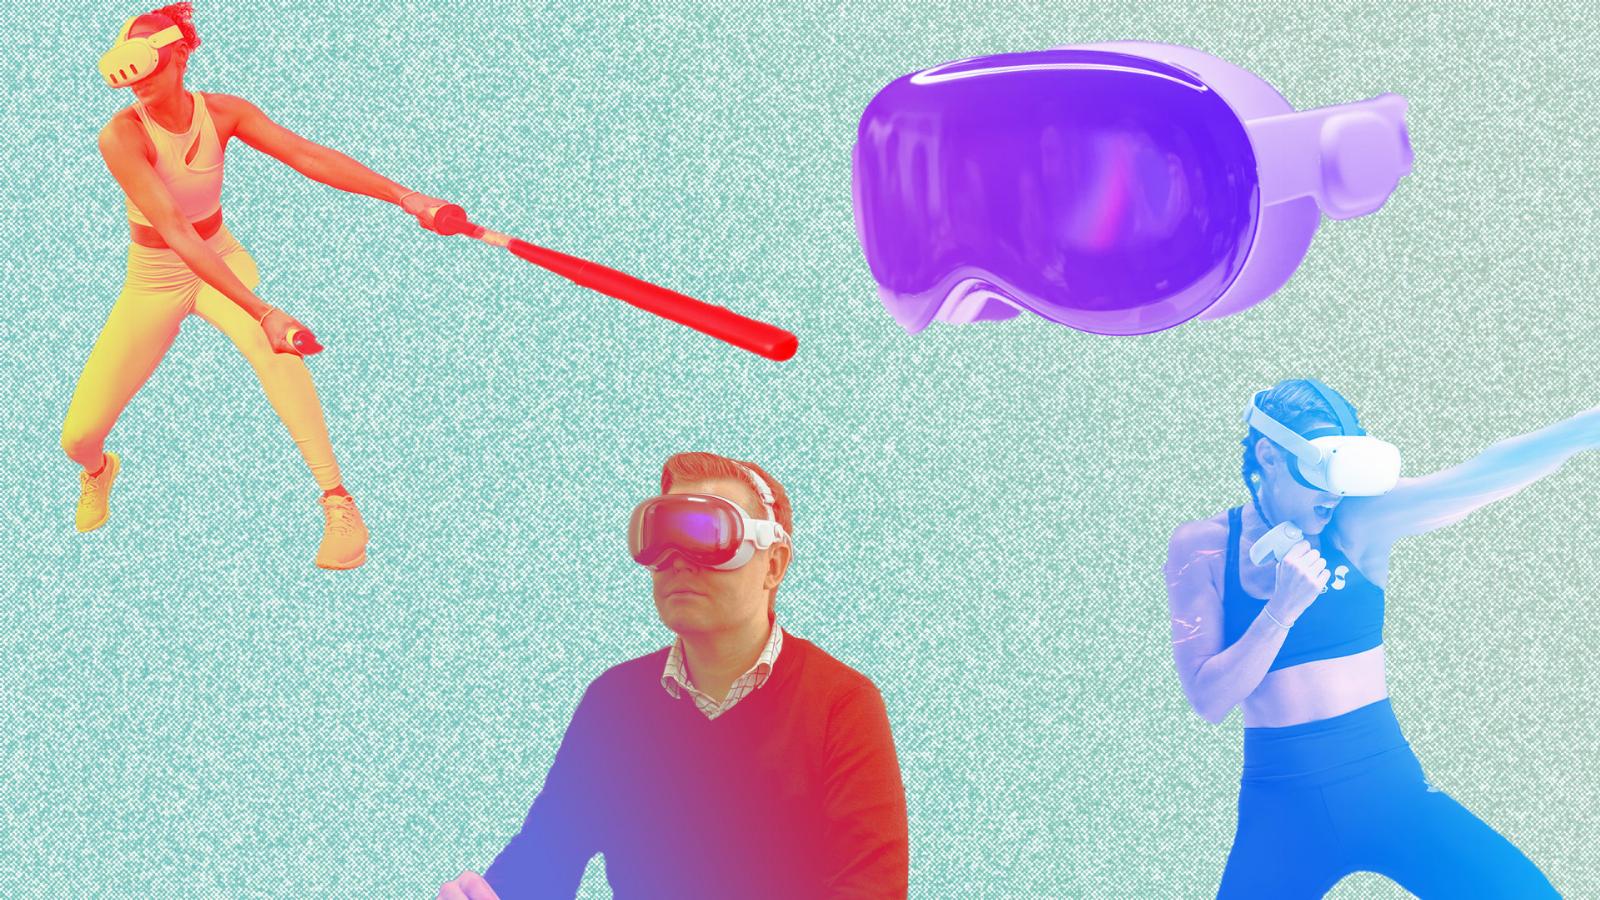 VR needs to build for its best use cases — not for all-around computing